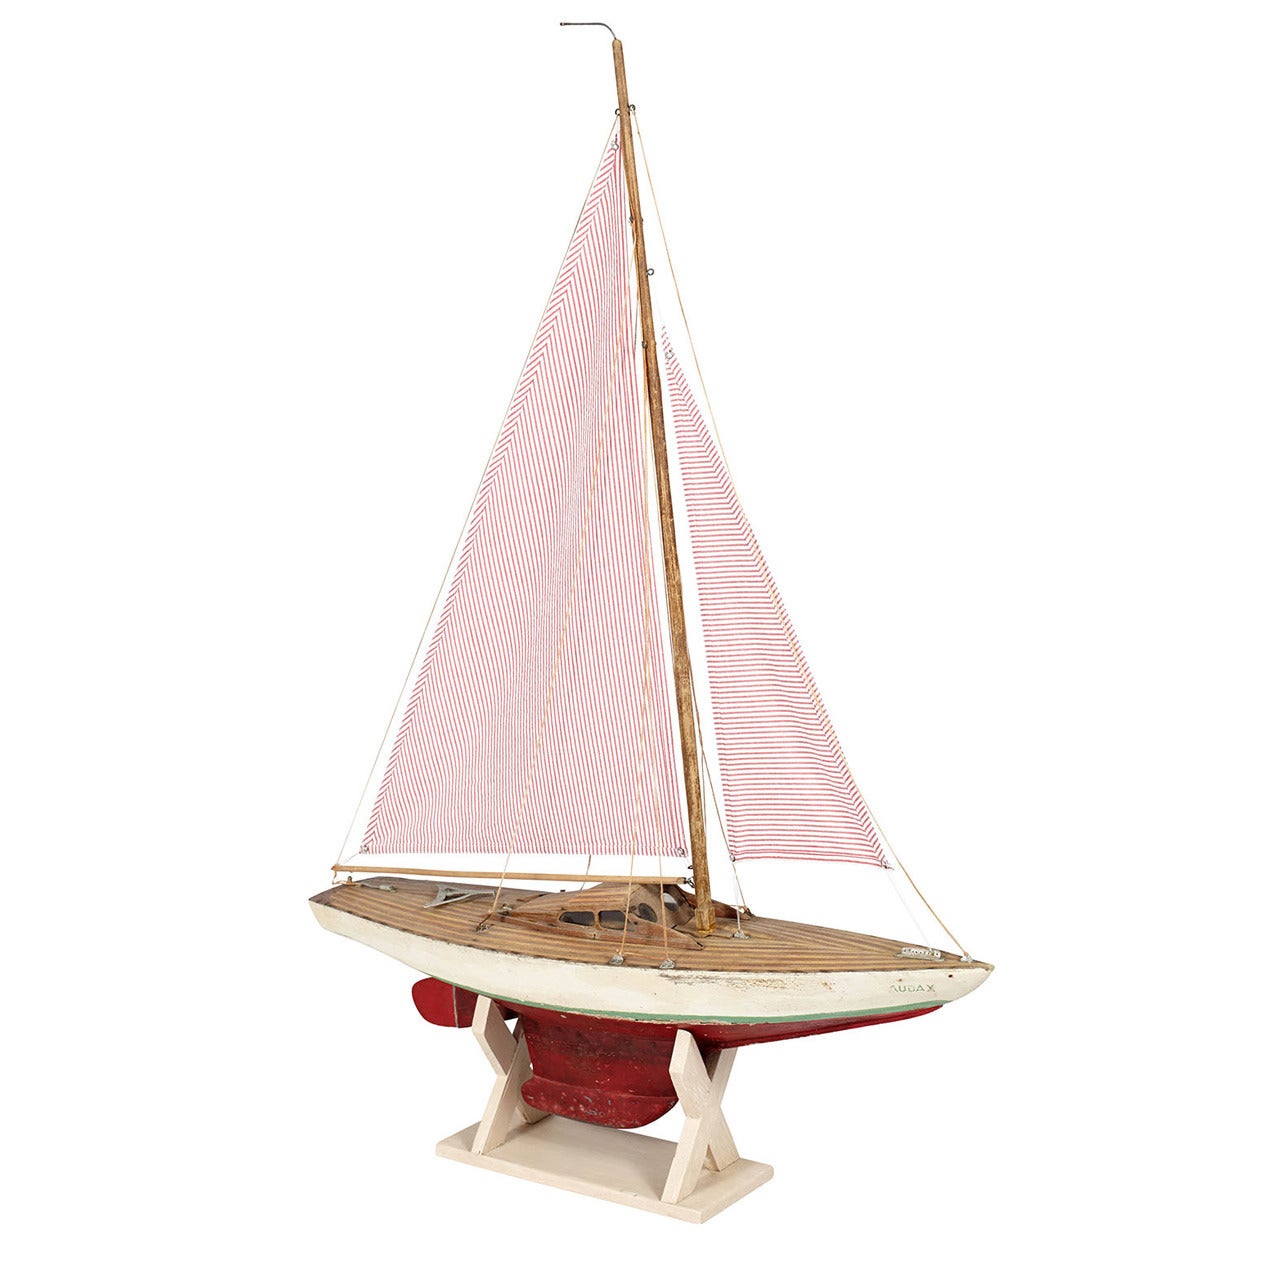 Model Sailboat with Red and White Sear-Sucker Sails